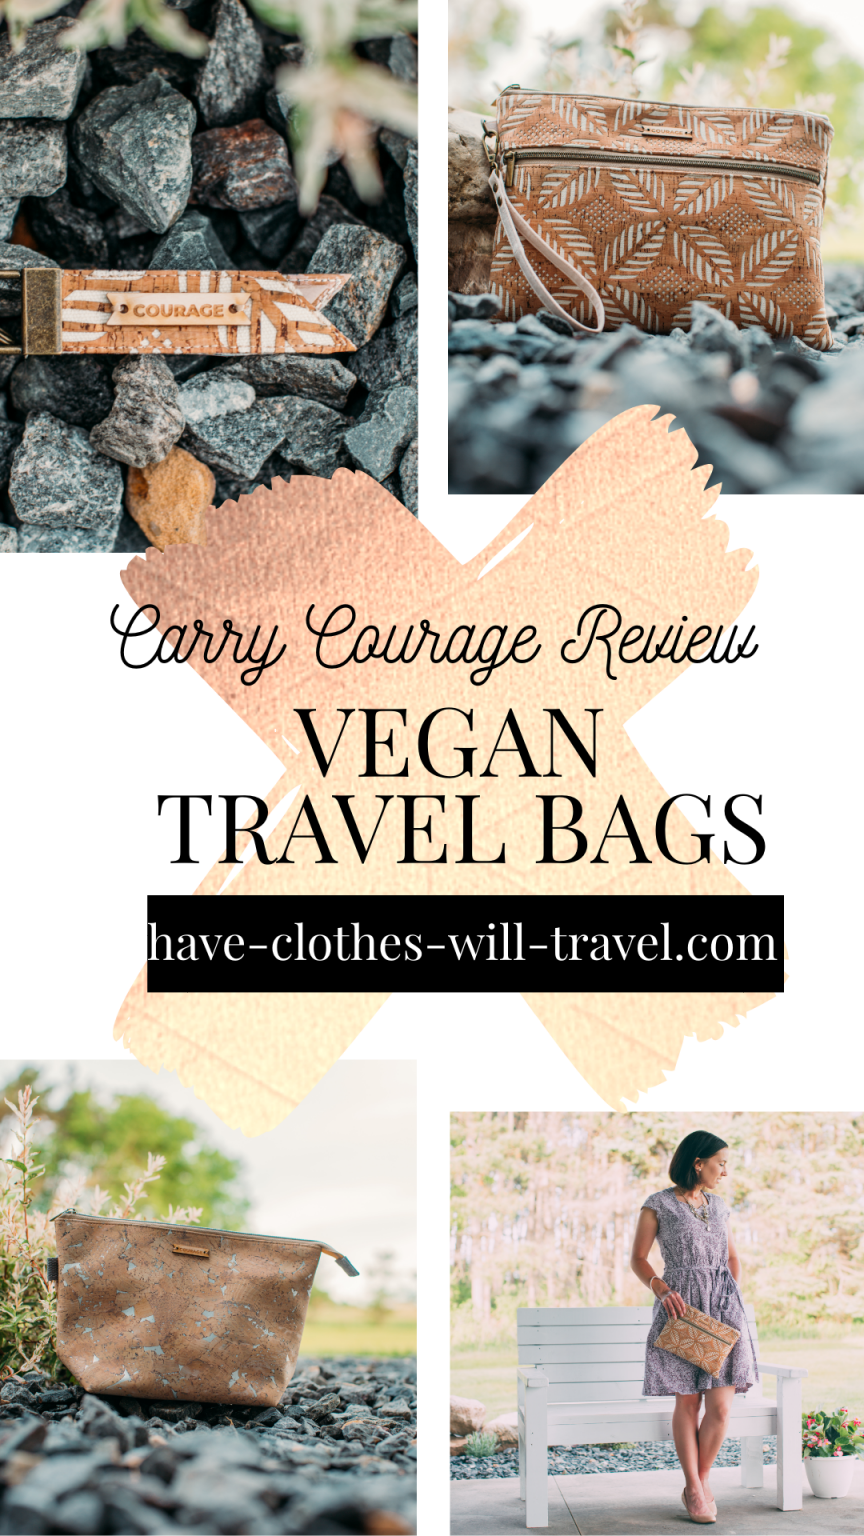 Carry Courage Travel Bags: Honest Review of a Sustainable Brand